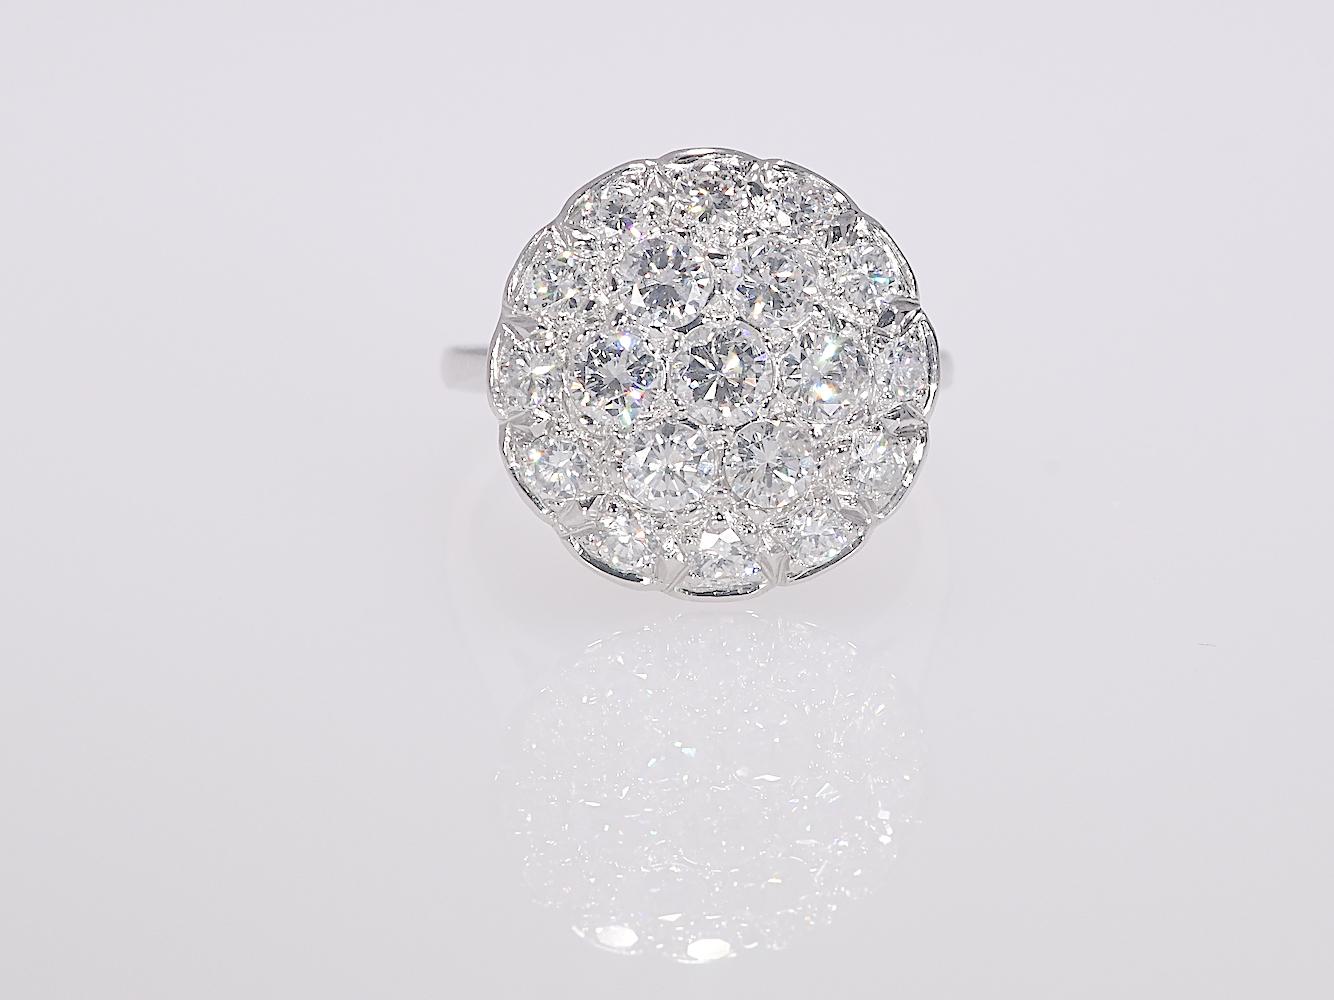 2 CTW Vintage Circular Cluster Natural Diamond Ring White Gold 14K 4.50 grams

Era: 1950's 
Stones: Natural Diamonds   TCW: 2.0    Color: GHI   Clarity: SI2-I2   Cut: Round
Metal: White Gold 
Purity: 14K 
Style: Round Cluster Ring
Finger Size 7 1/4